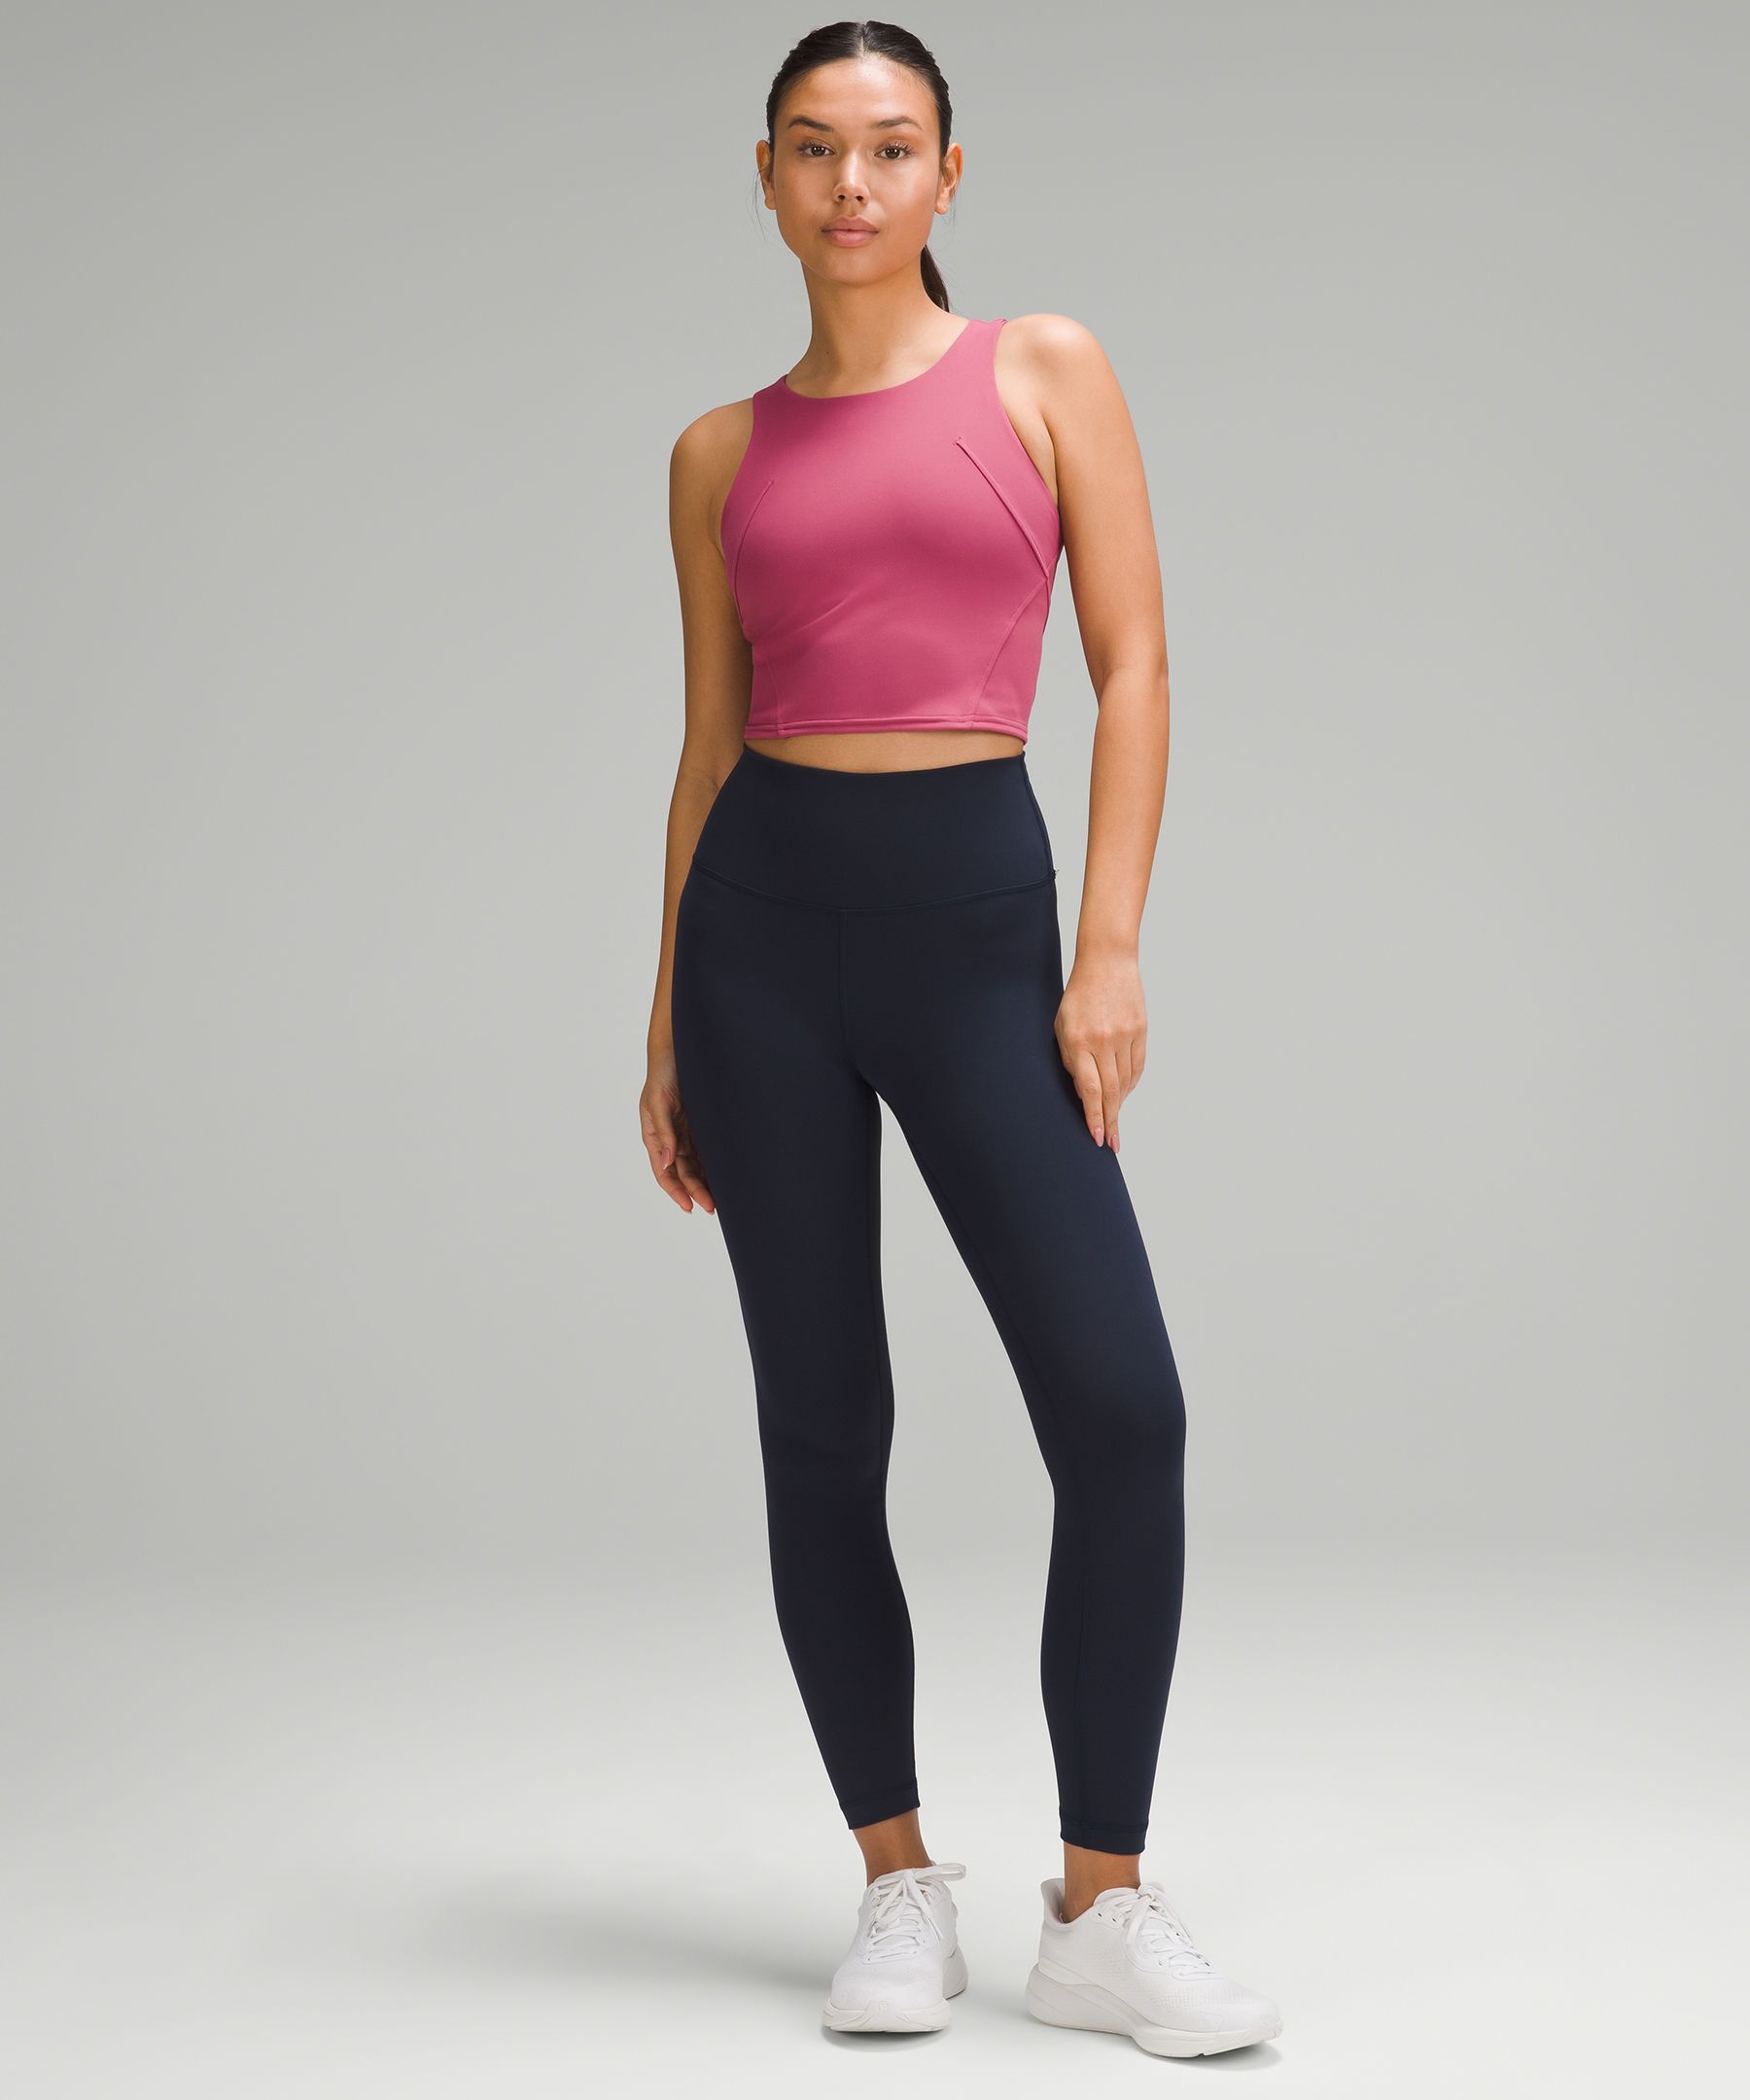 Lululemon Athletica Women's Activewear On Sale Up To 90% Off